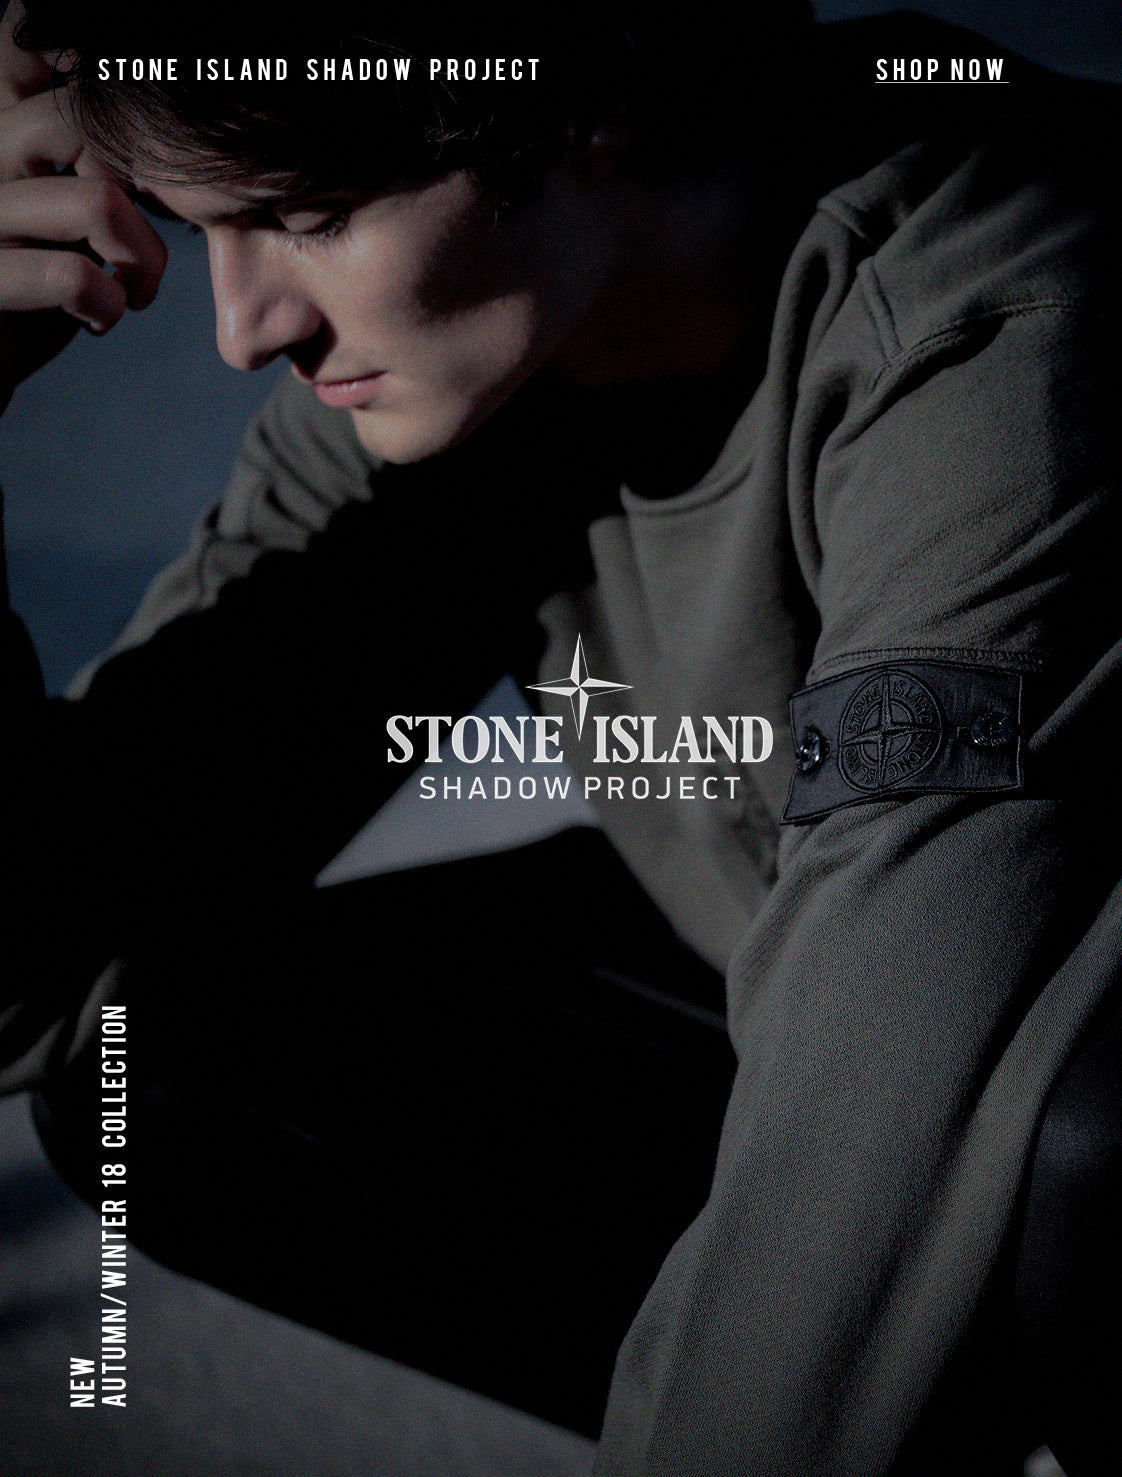 Introducing Stone Island Shadow Project - Autumn/Winter '18 card image